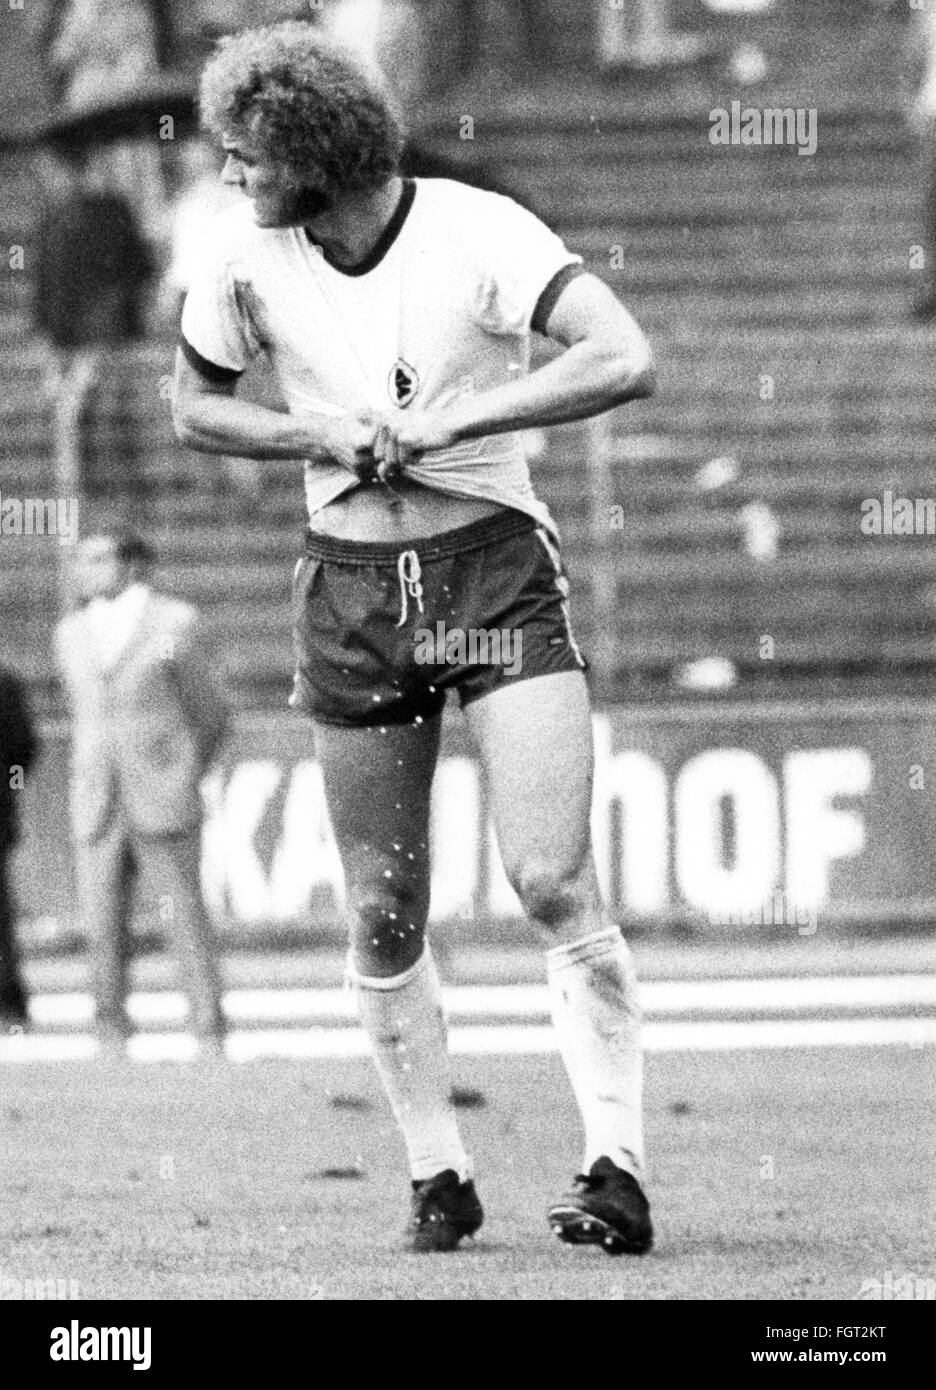 sports,football,games,Germany,national league,season 1970 / 1971,32rd match day,game 1. FC Koeln versus Rot-Weiss Oberhausen(2:4),Muengersdorf stadium,Cologne,22.5.1971,Wolfgang Kliemann(Oberhausen)wrings his sweat soak jersey out,football match,soccer match,football matches,footballer,footballers,kicker,football player,football players,wring out,wringing out,wrung out,perspiration,exertion,exertions,strain,straining,sweaty,heat,hot,West Germany,Western Germany,Germany,1970s,70s,20th century,people,full length,man,men,,Additional-Rights-Clearences-Not Available Stock Photo